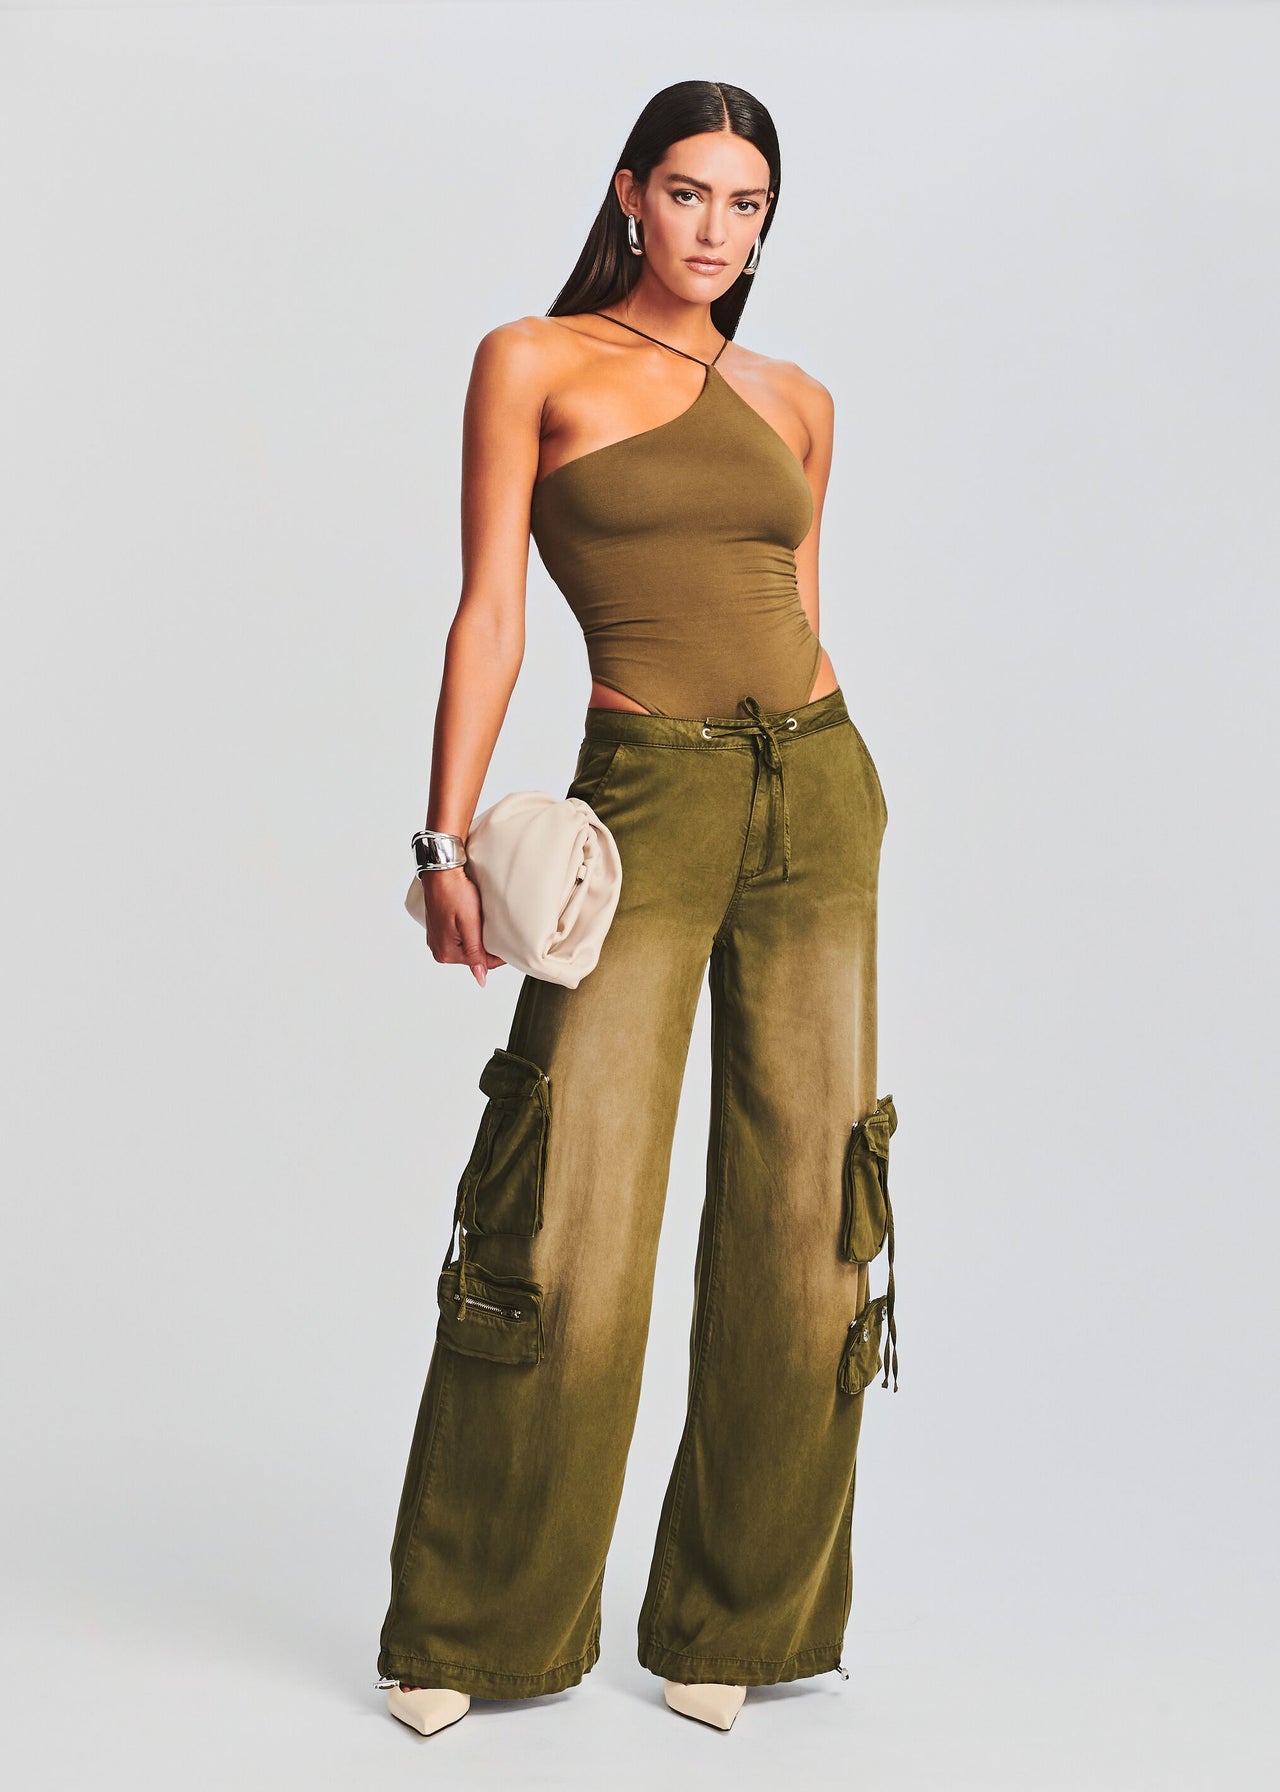 Green Flared Cargo Pants Camo Bellbottom Low Rise Trousers -  Finland